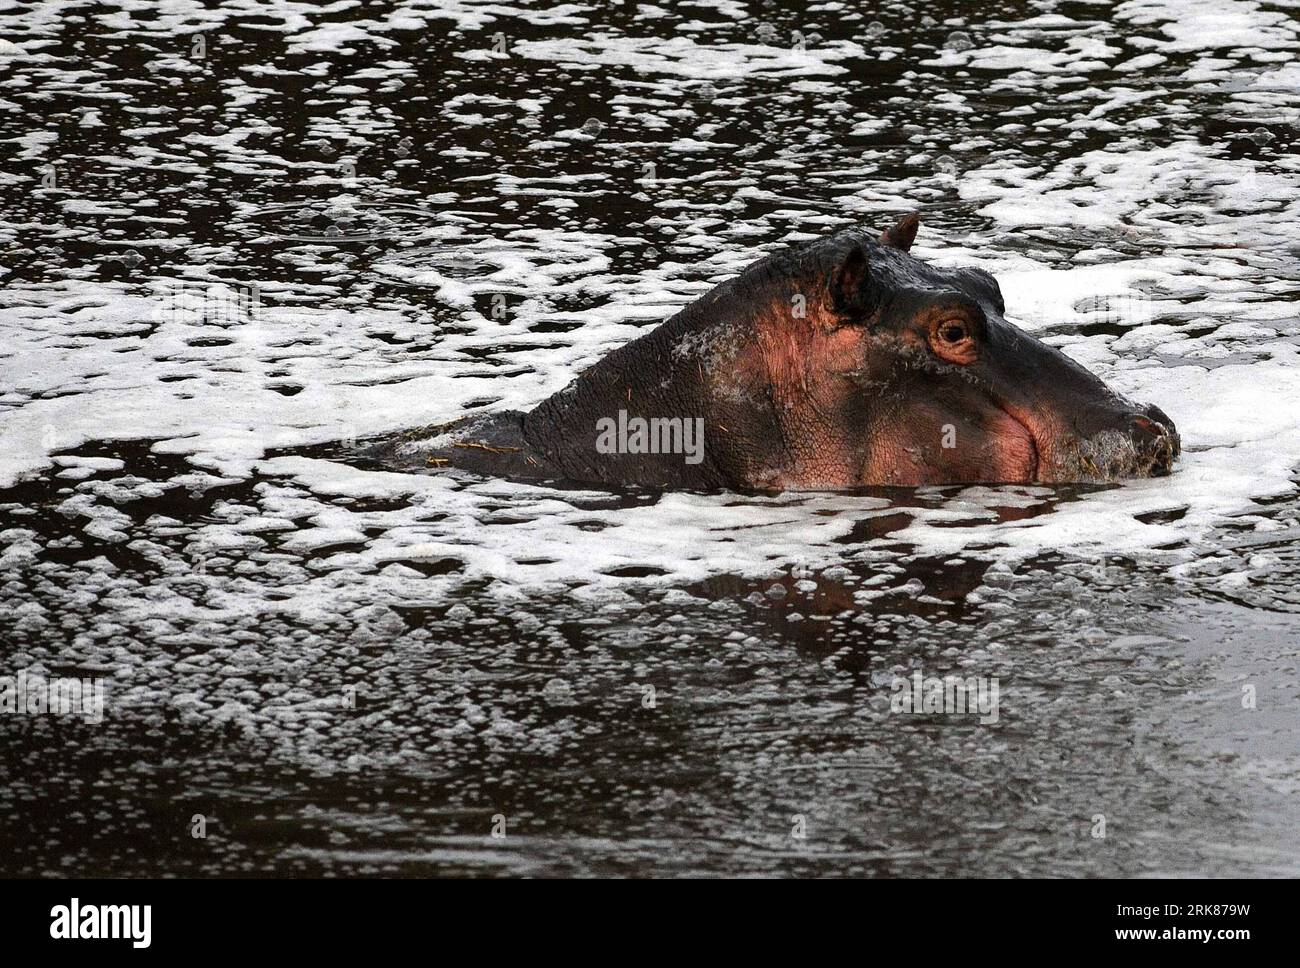 Bildnummer: 53978903  Datum: 11.04.2010  Copyright: imago/Xinhua (100426) -- NAIROBI, April 26, 2010 (Xinhua) -- A hippo swims in the Kenya section of the Mara River April 11, 2010. The East African Community (EAC) described the Mara River Basin as a regional and global resource that should be conserved at all costs, according to its newly released reports developed following the reduction in vegetation cover and species diversity, and the over-exploitation and competition from invasive species, mainly as a consequence of human population growth. (Xinhua/Xu Suhui)(lx) (1)KENYA-MARA RIVER BASIN Stock Photo